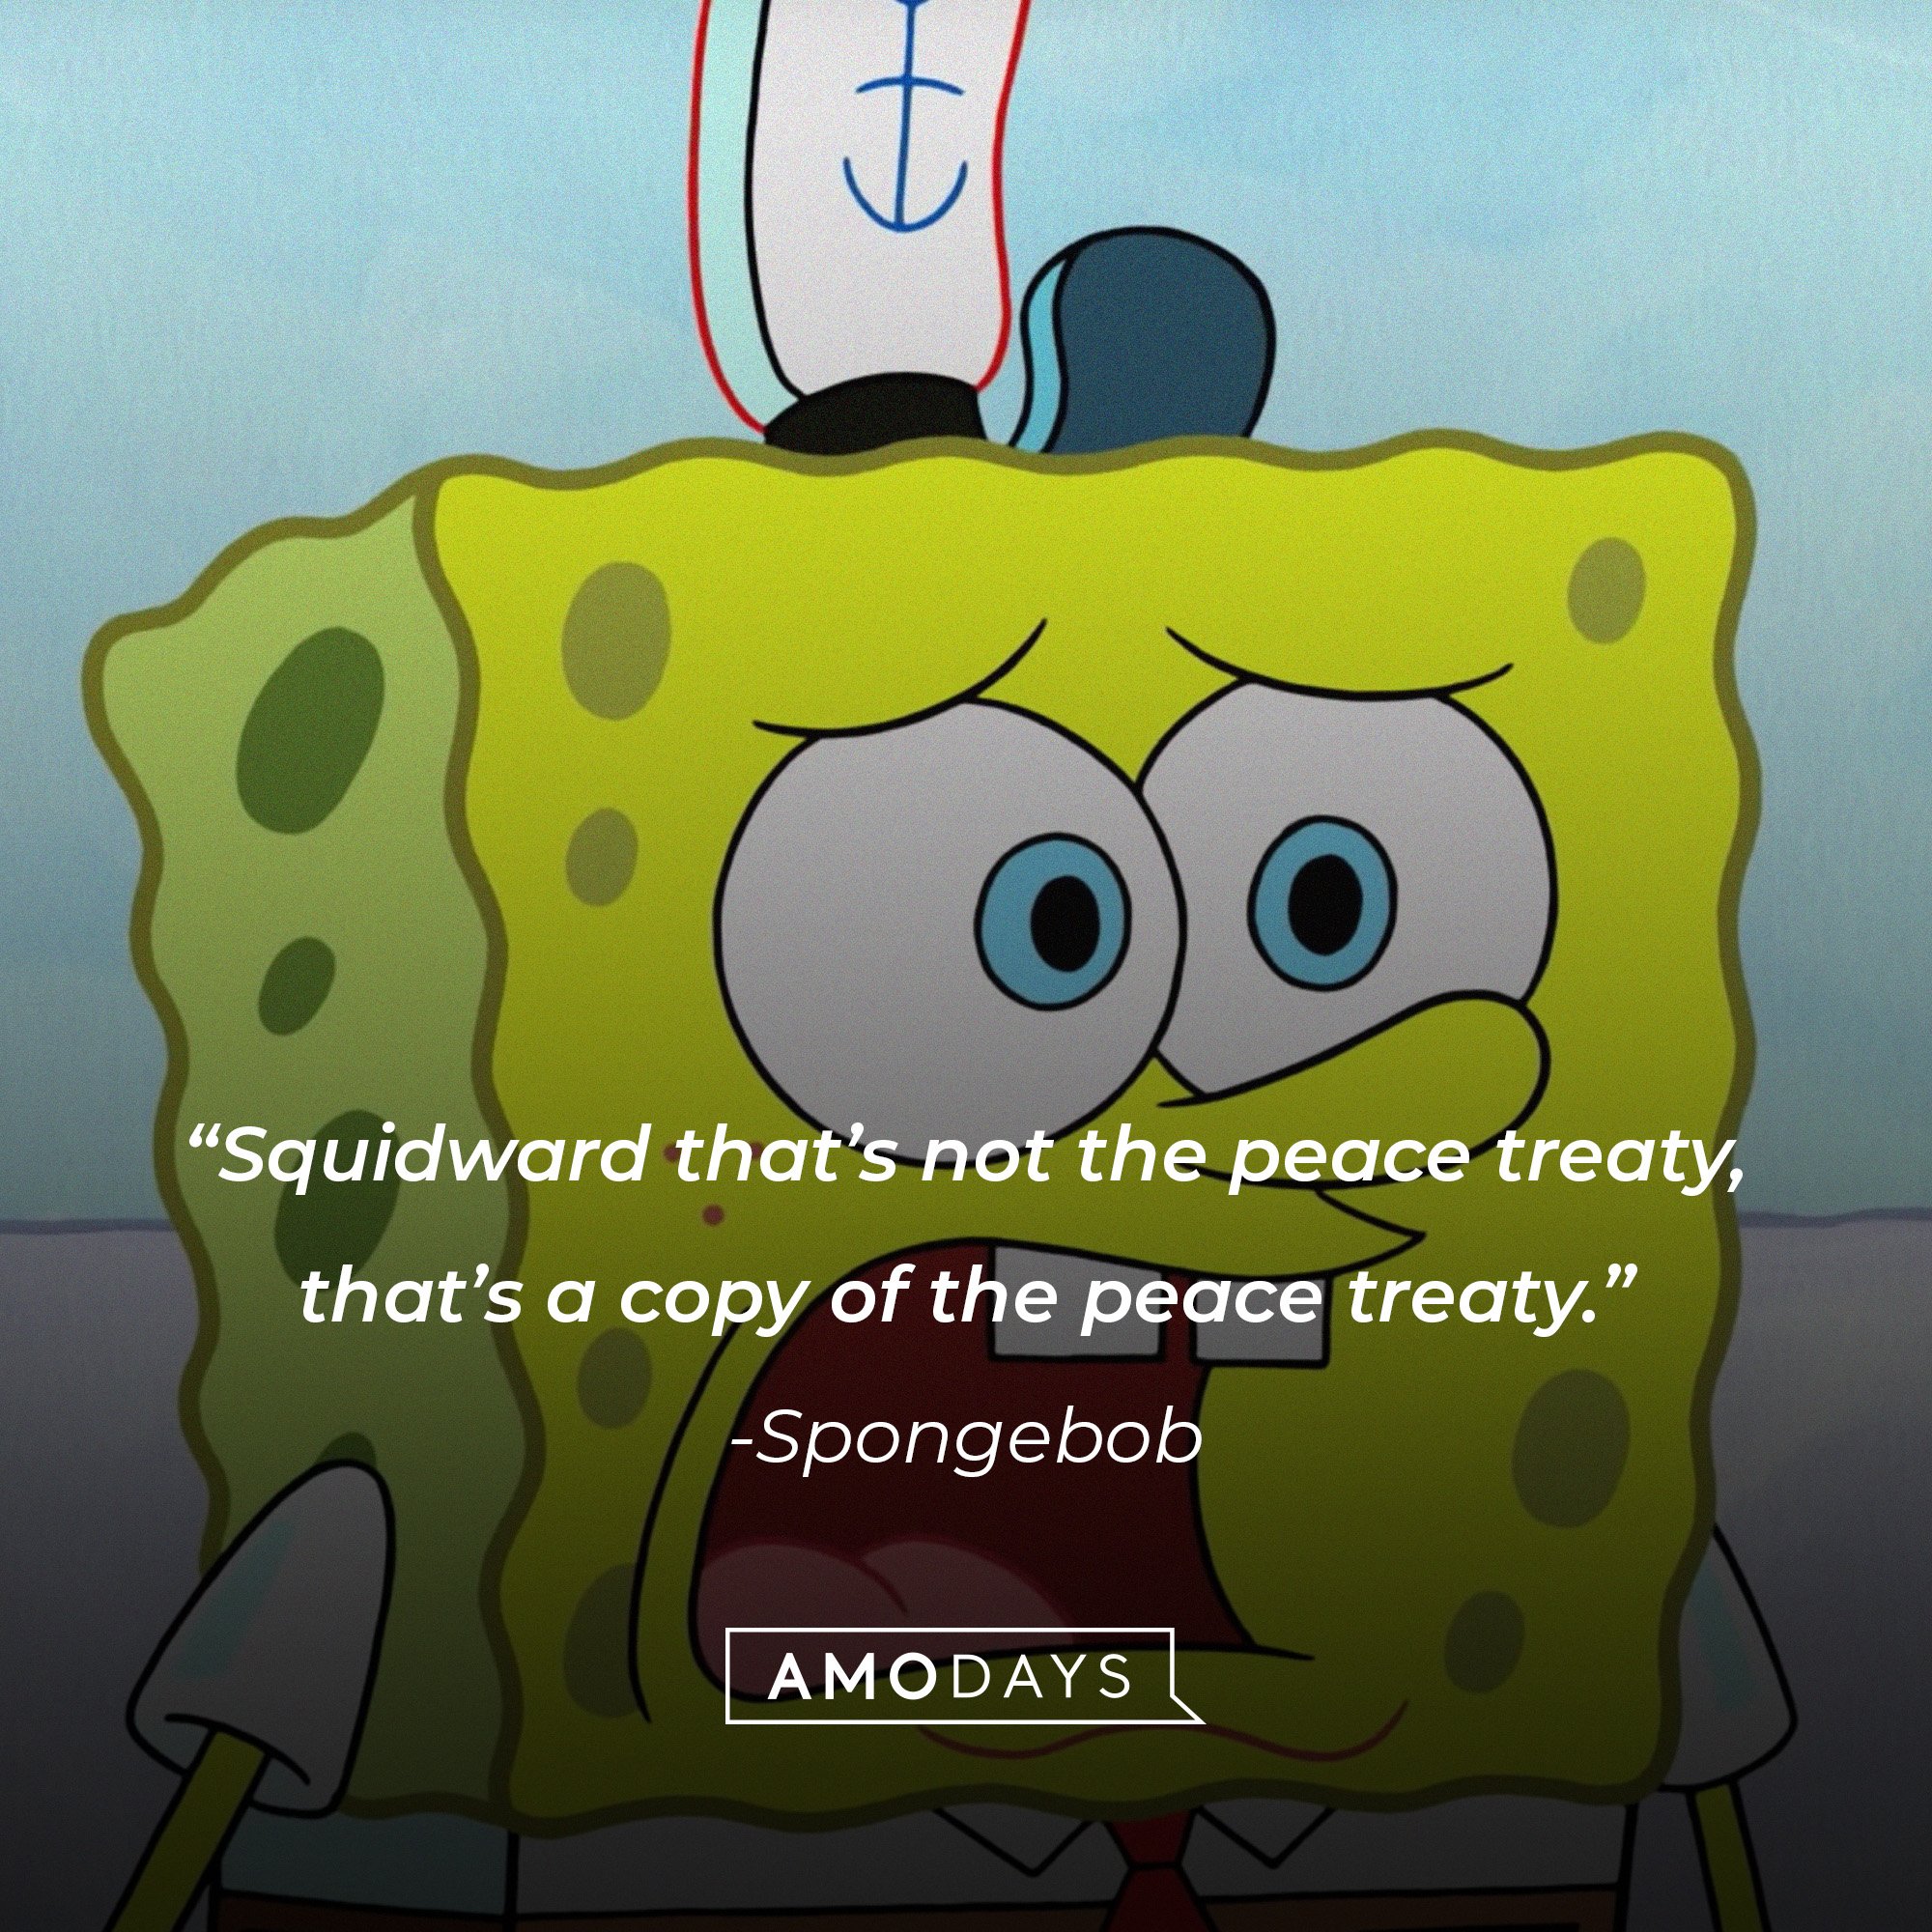 Spongebob Squarepants’ quote: “Squidward that’s not the peace treaty, that’s a copy of the peace treaty.” | Source: AmoDays